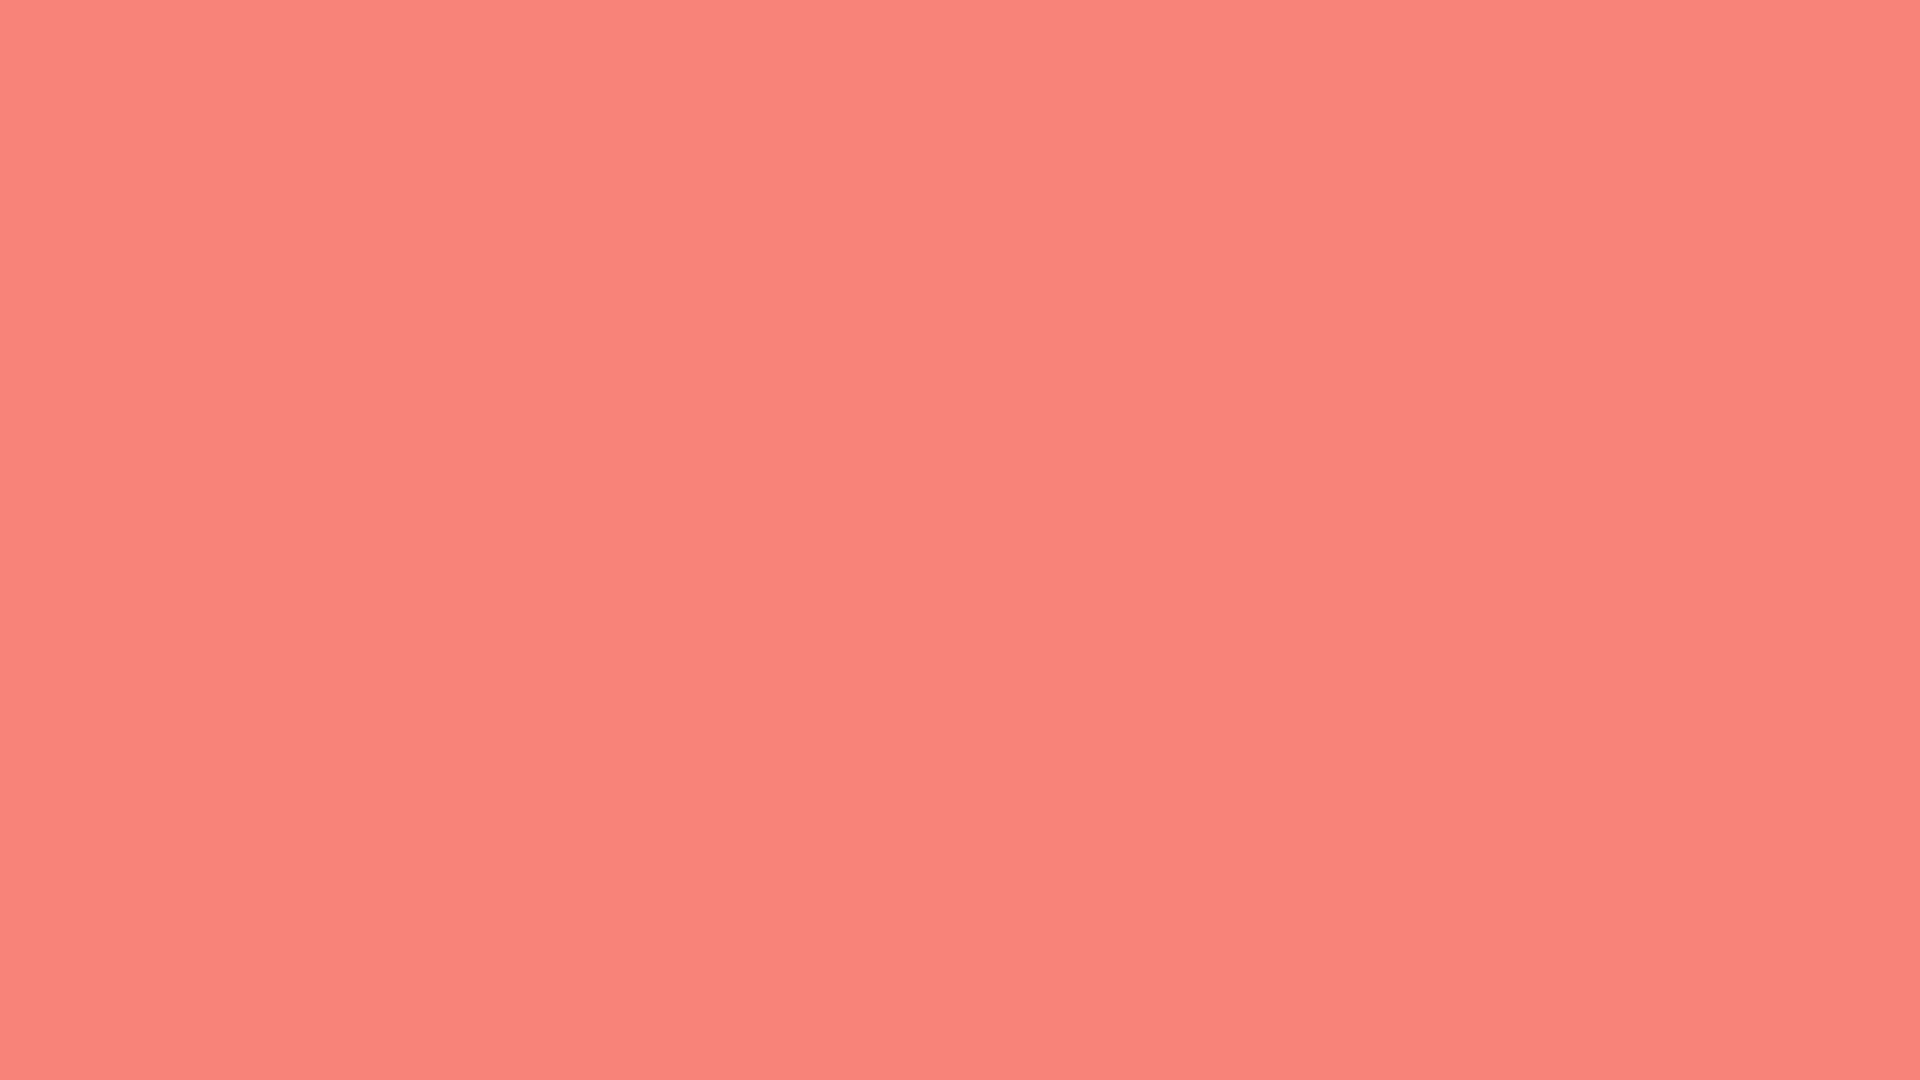 1920x1080 Congo Pink Solid Color Background